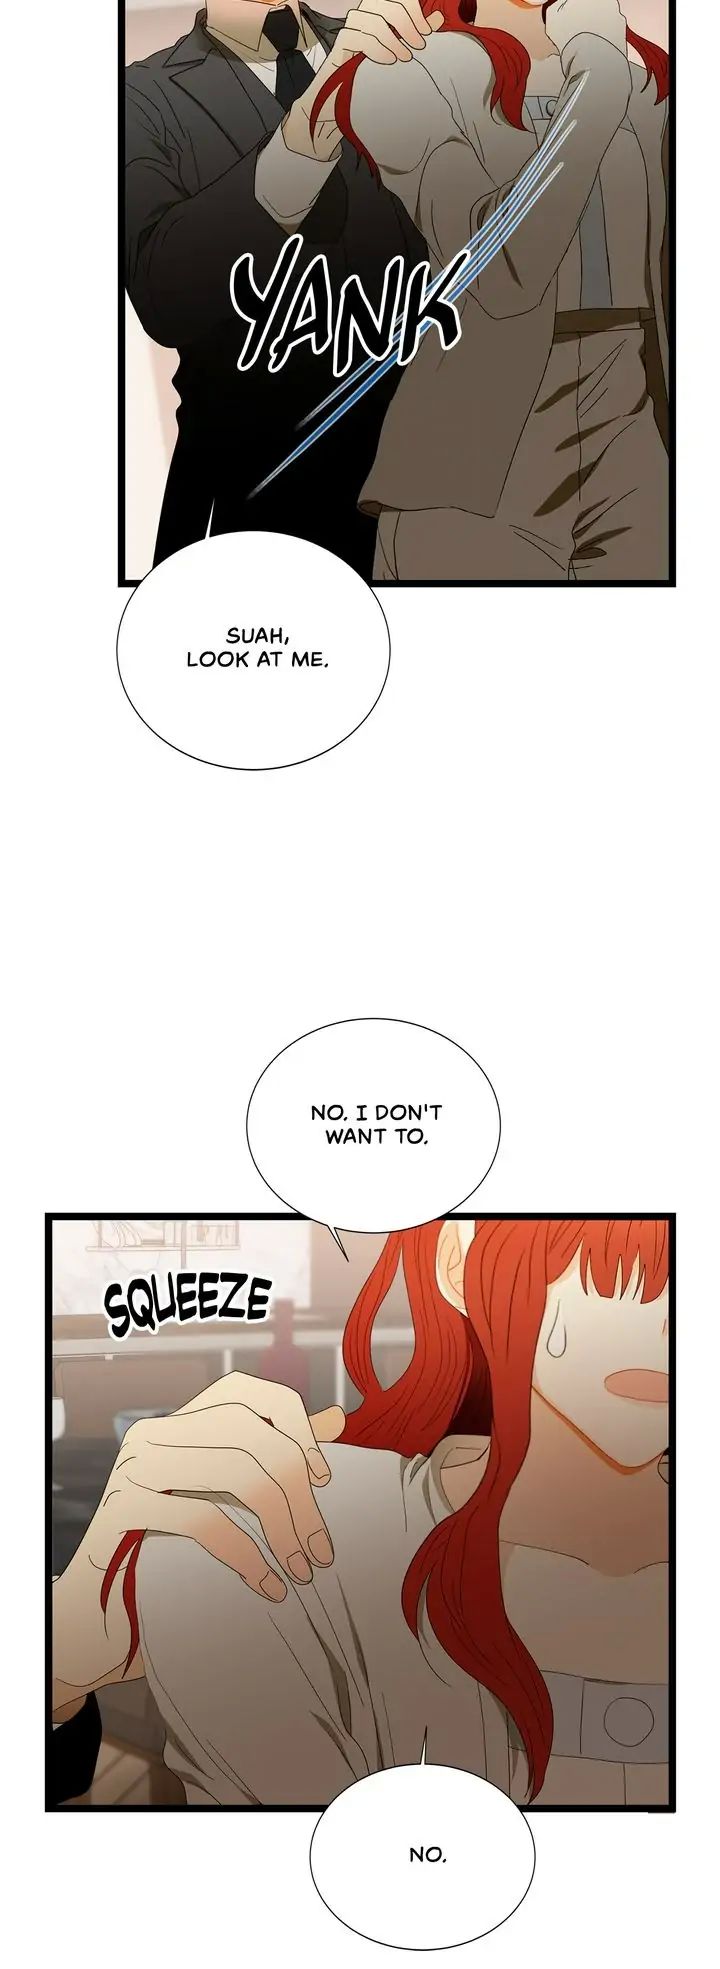 Faking It In Style - Page 3